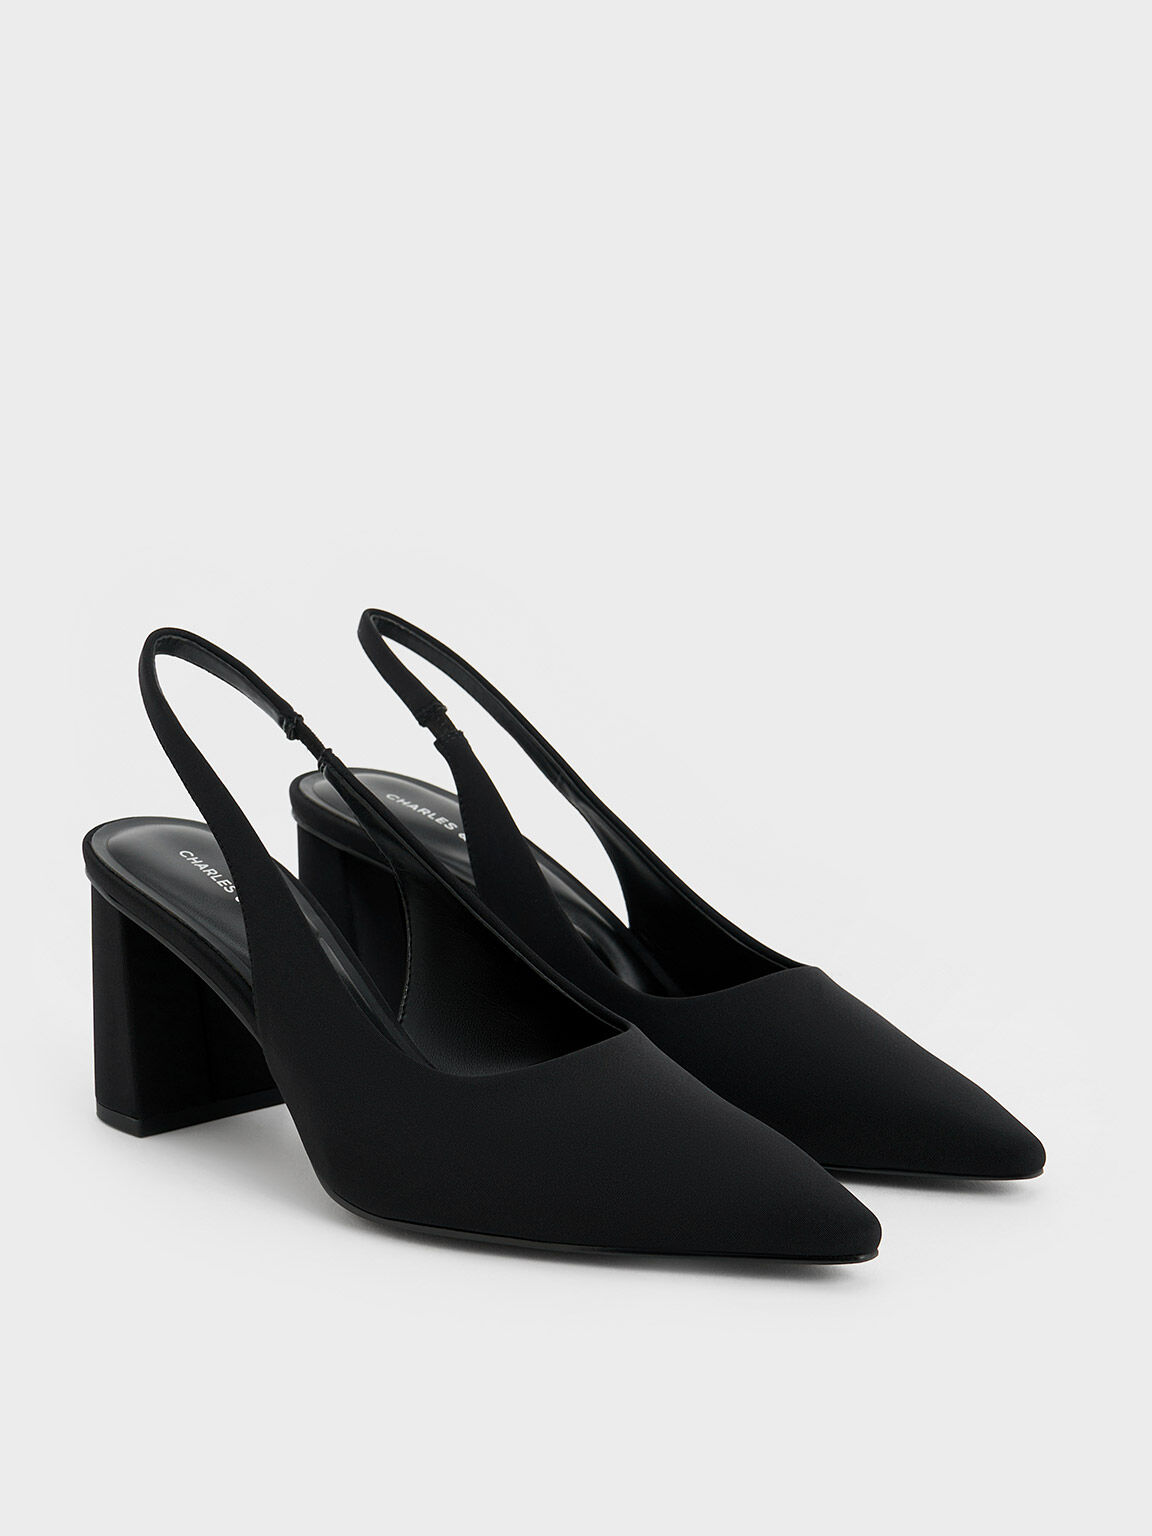 Women's Pumps | Shop Exclusive Styles | CHARLES & KEITH SG